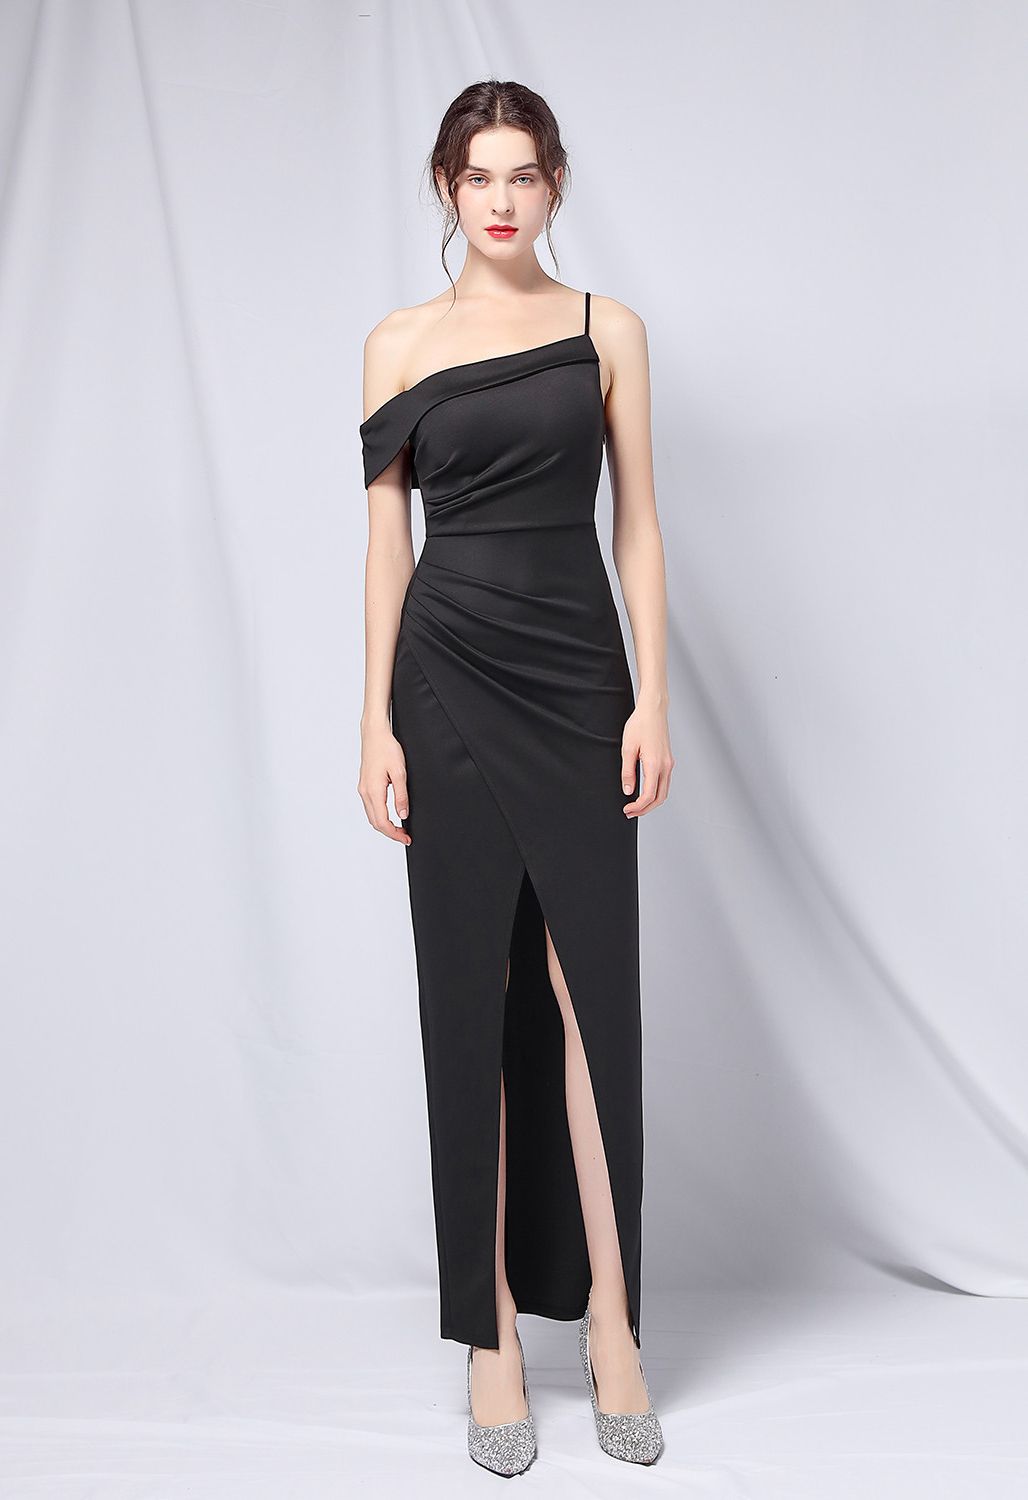 Single Strap Front Slit Gown in Black